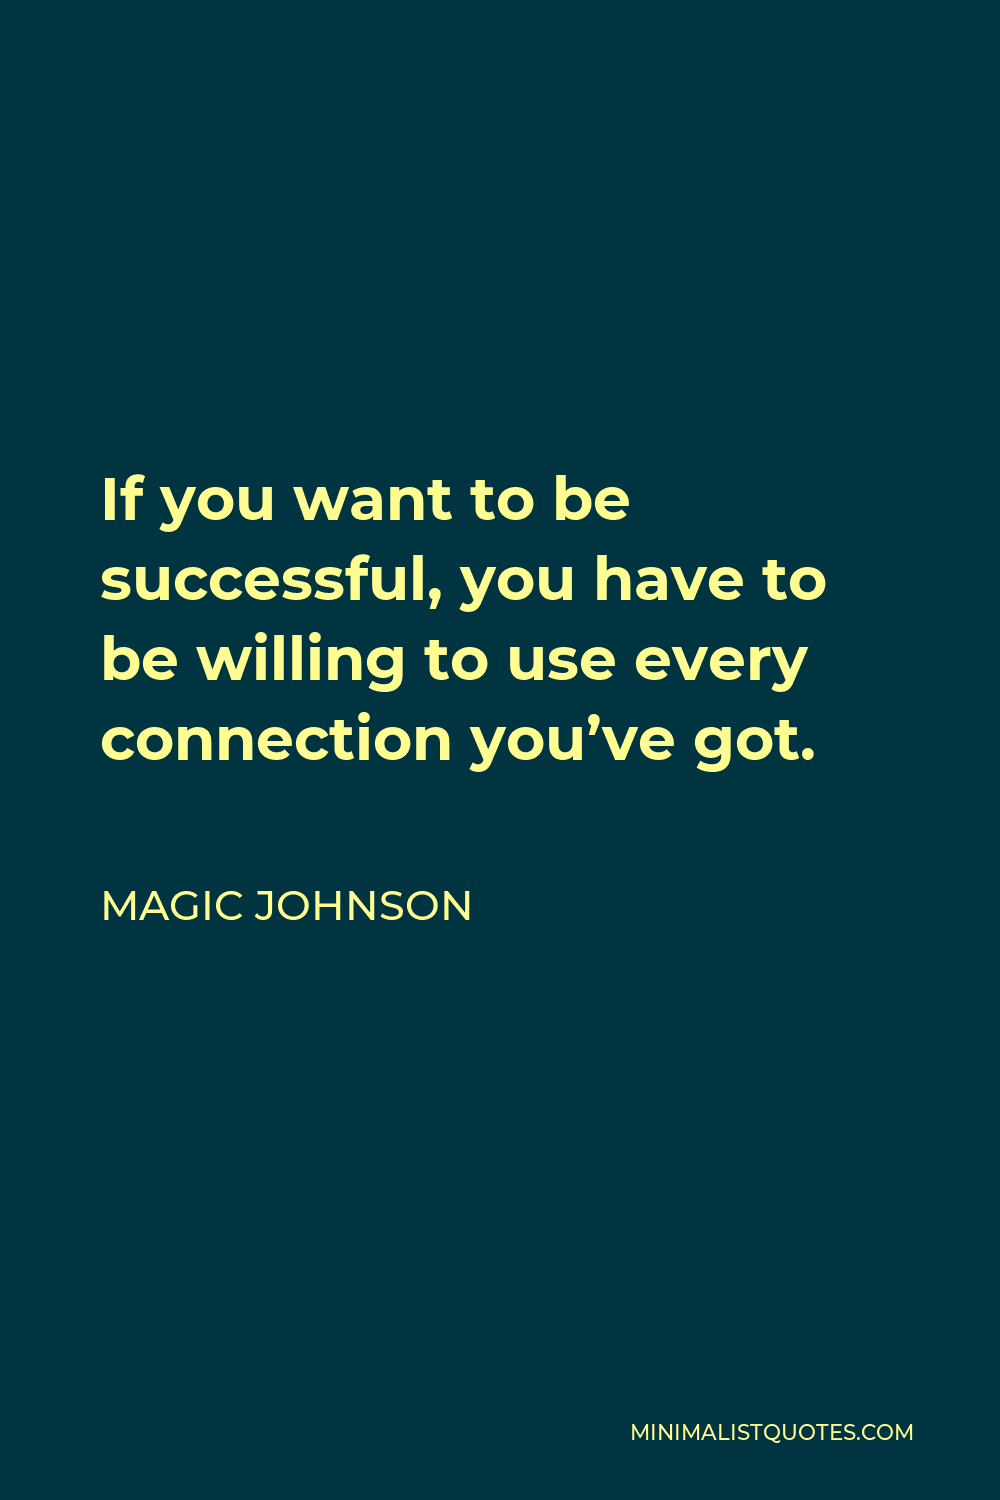 Magic Johnson Quote - If you want to be successful, you have to be willing to use every connection you’ve got.